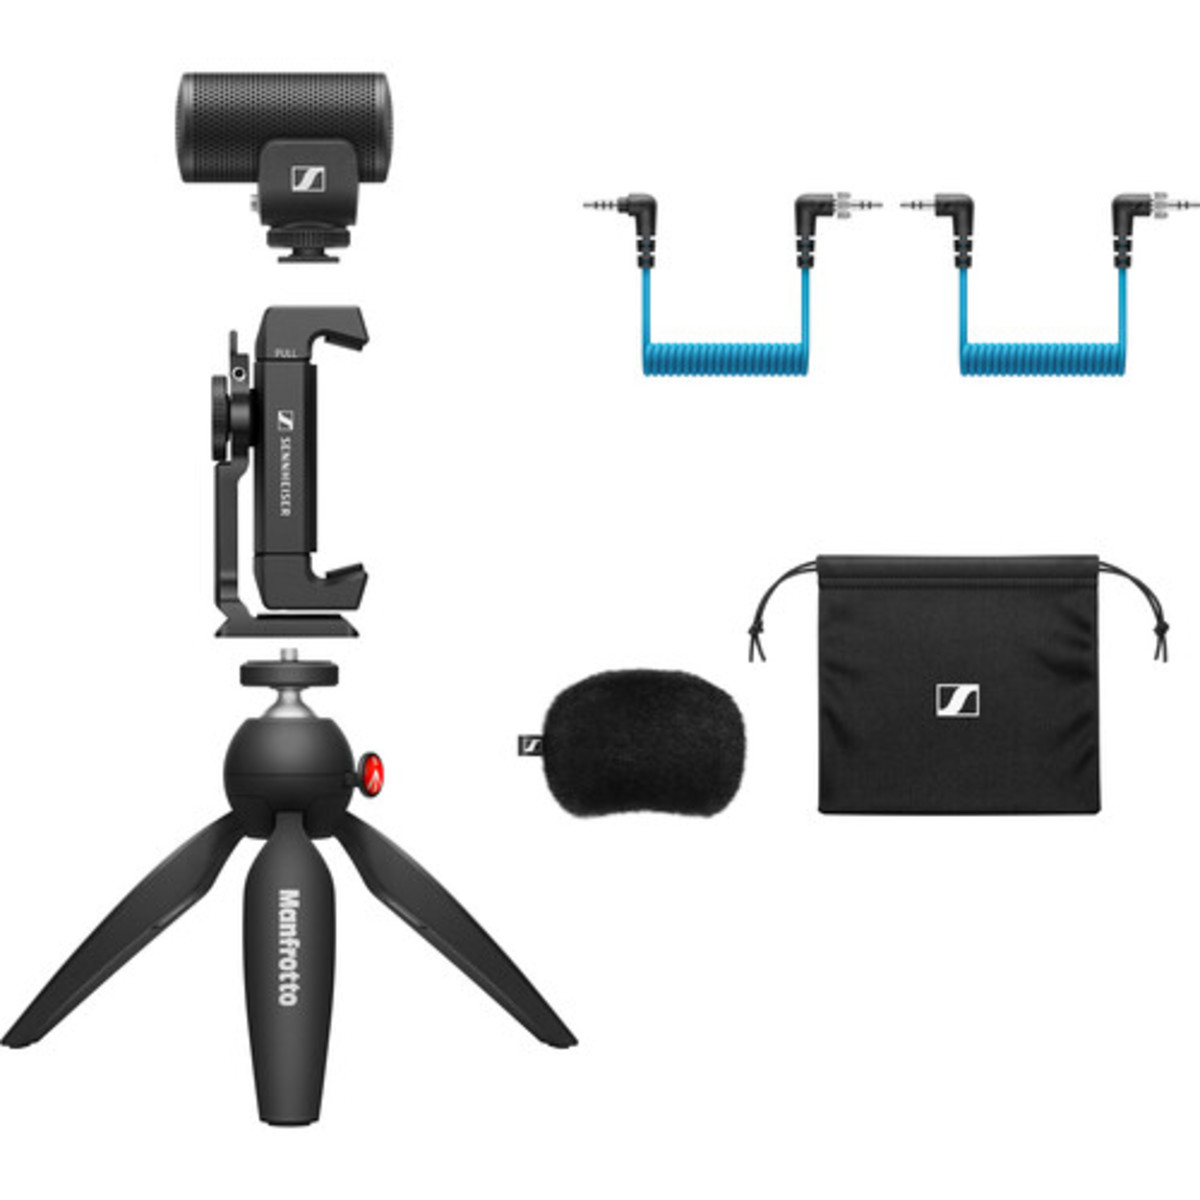 Sennheiser's New Mics & Mobile Kits Are For Vloggers & Content Creators